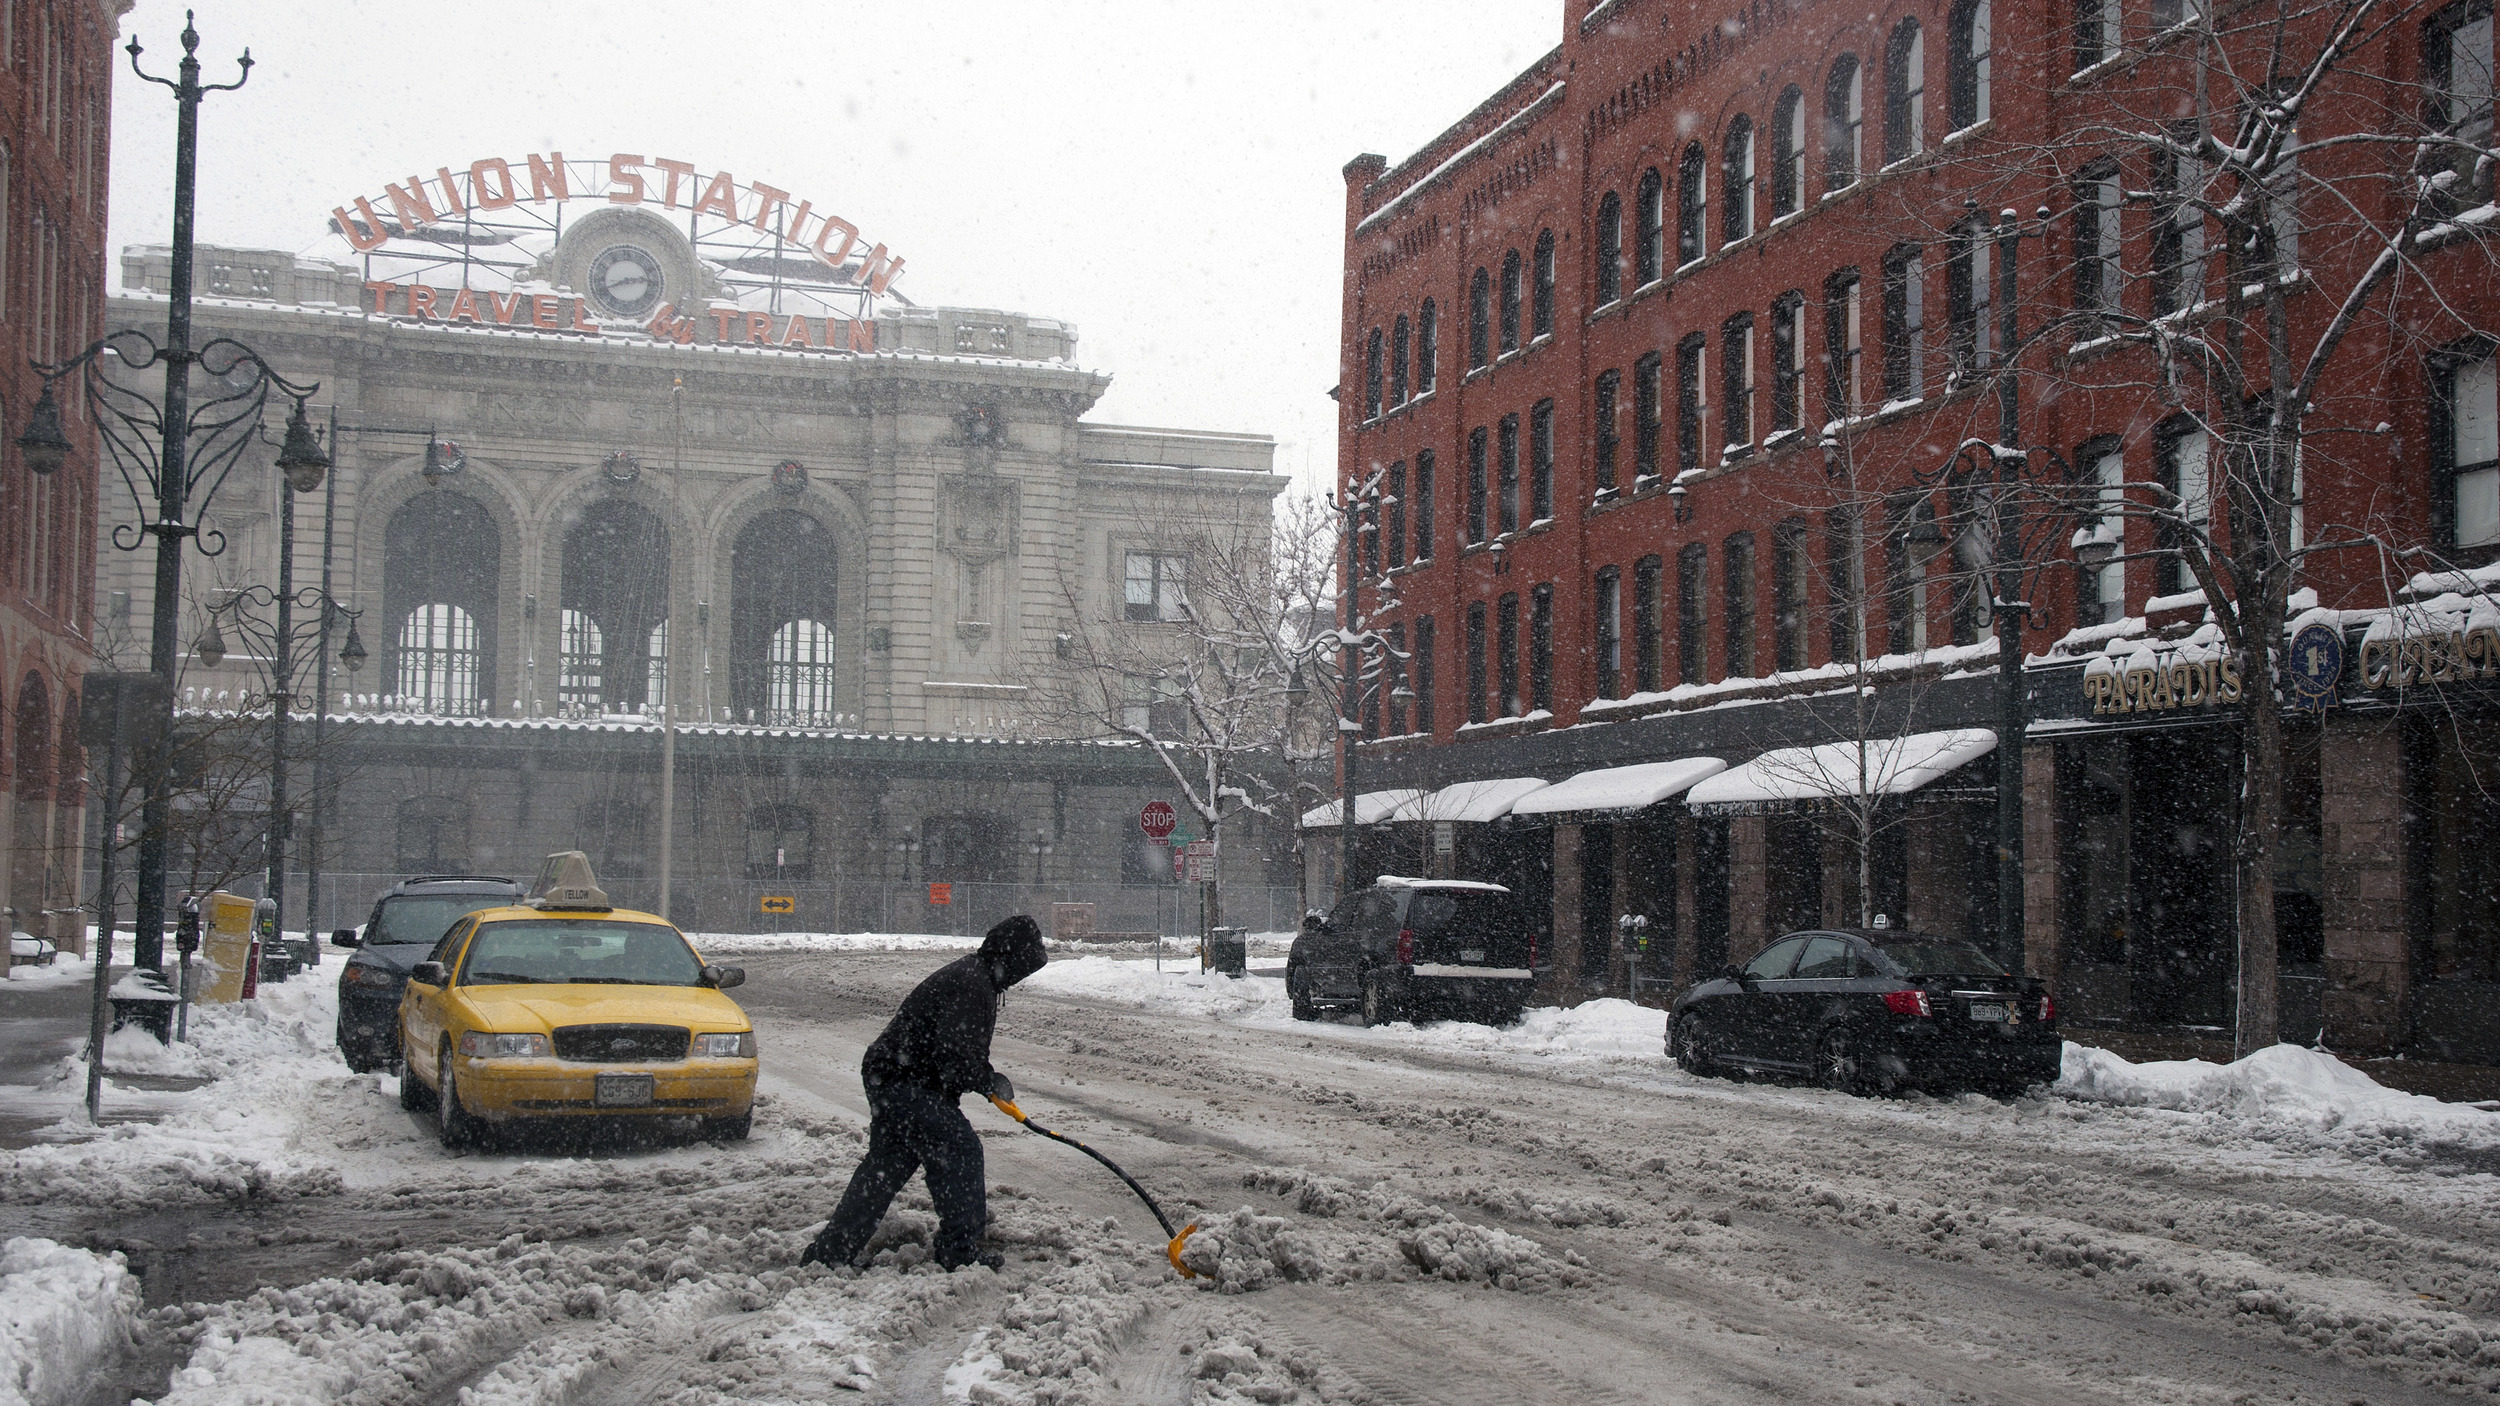  A man clears snow on Denver's 17th Street during a blizzard. By the time the snow stopped, nearly a foot and a half of snow blanketed the city. 